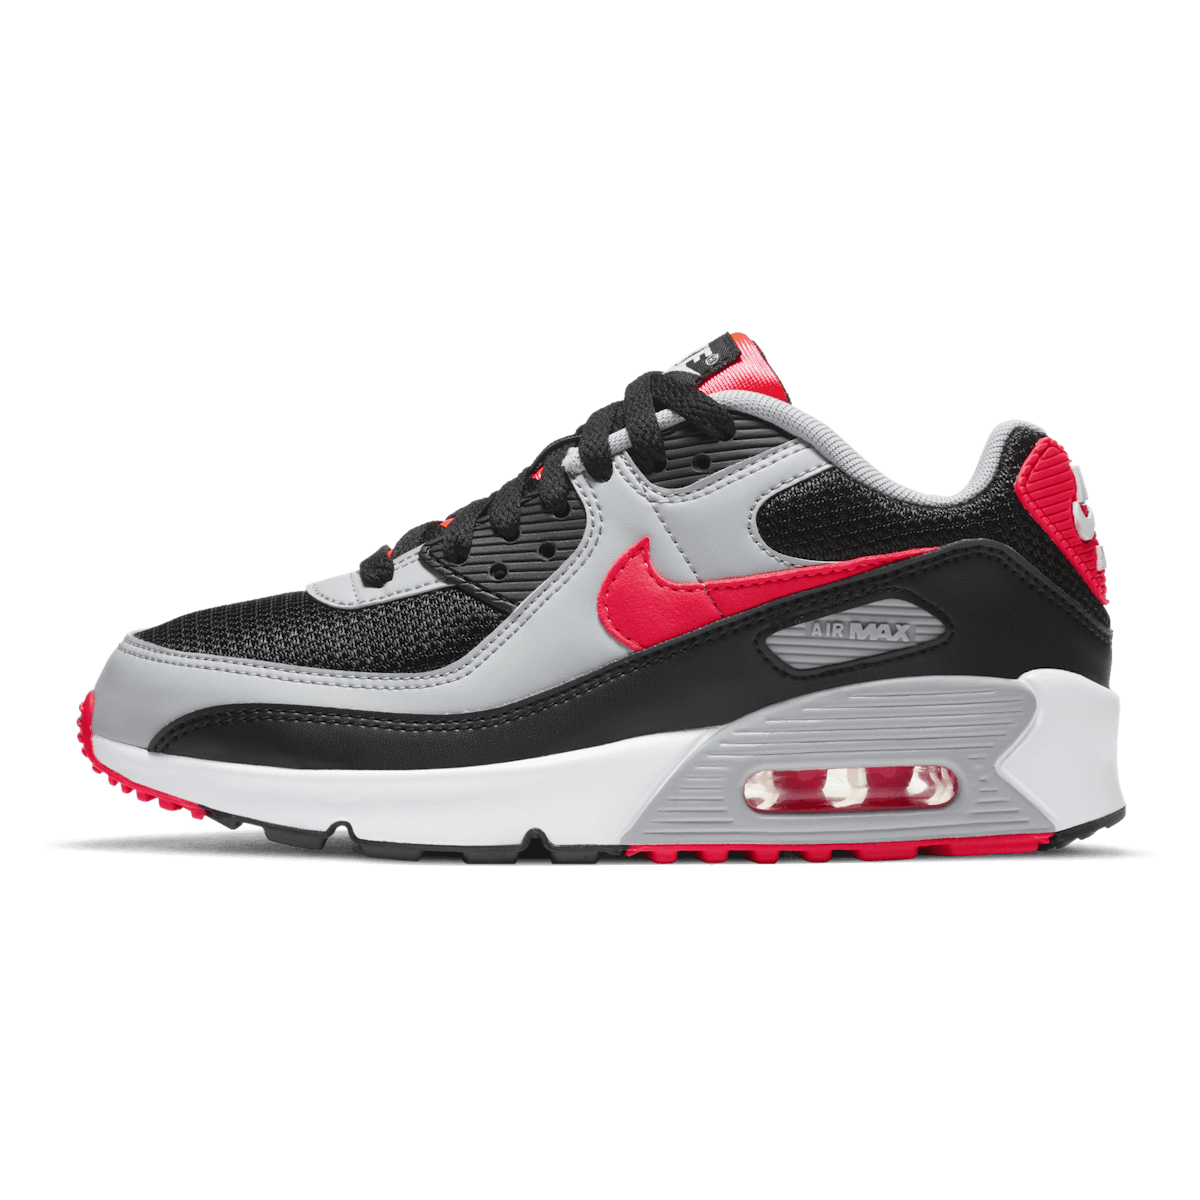 Nike Air Max 90 GS "Radiant Red"